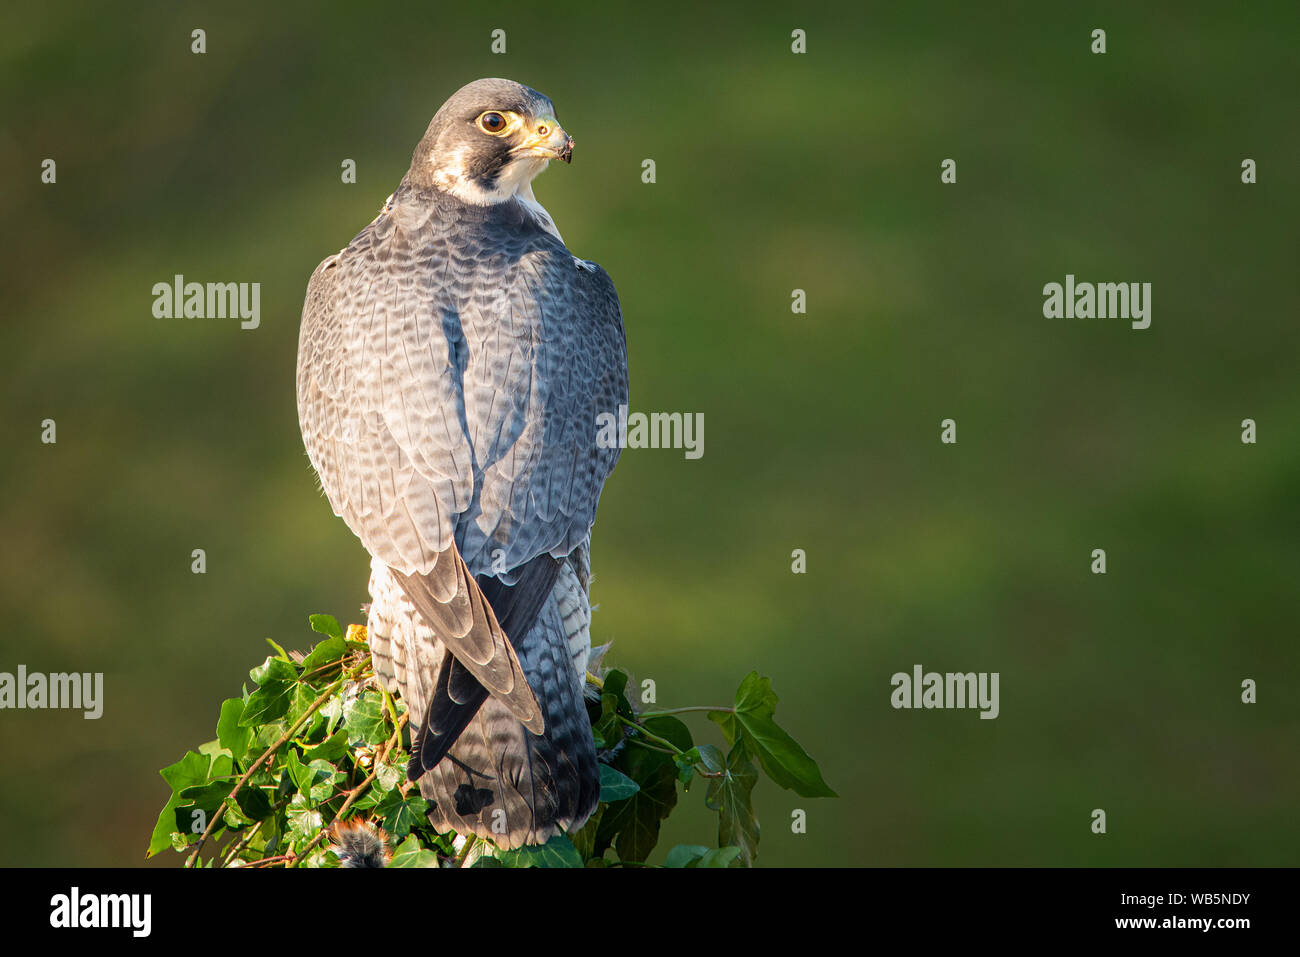 A full length portrait of a peregrine falcon from behind. It is perched on a post looking to the right with a natural green background. There is copy Stock Photo